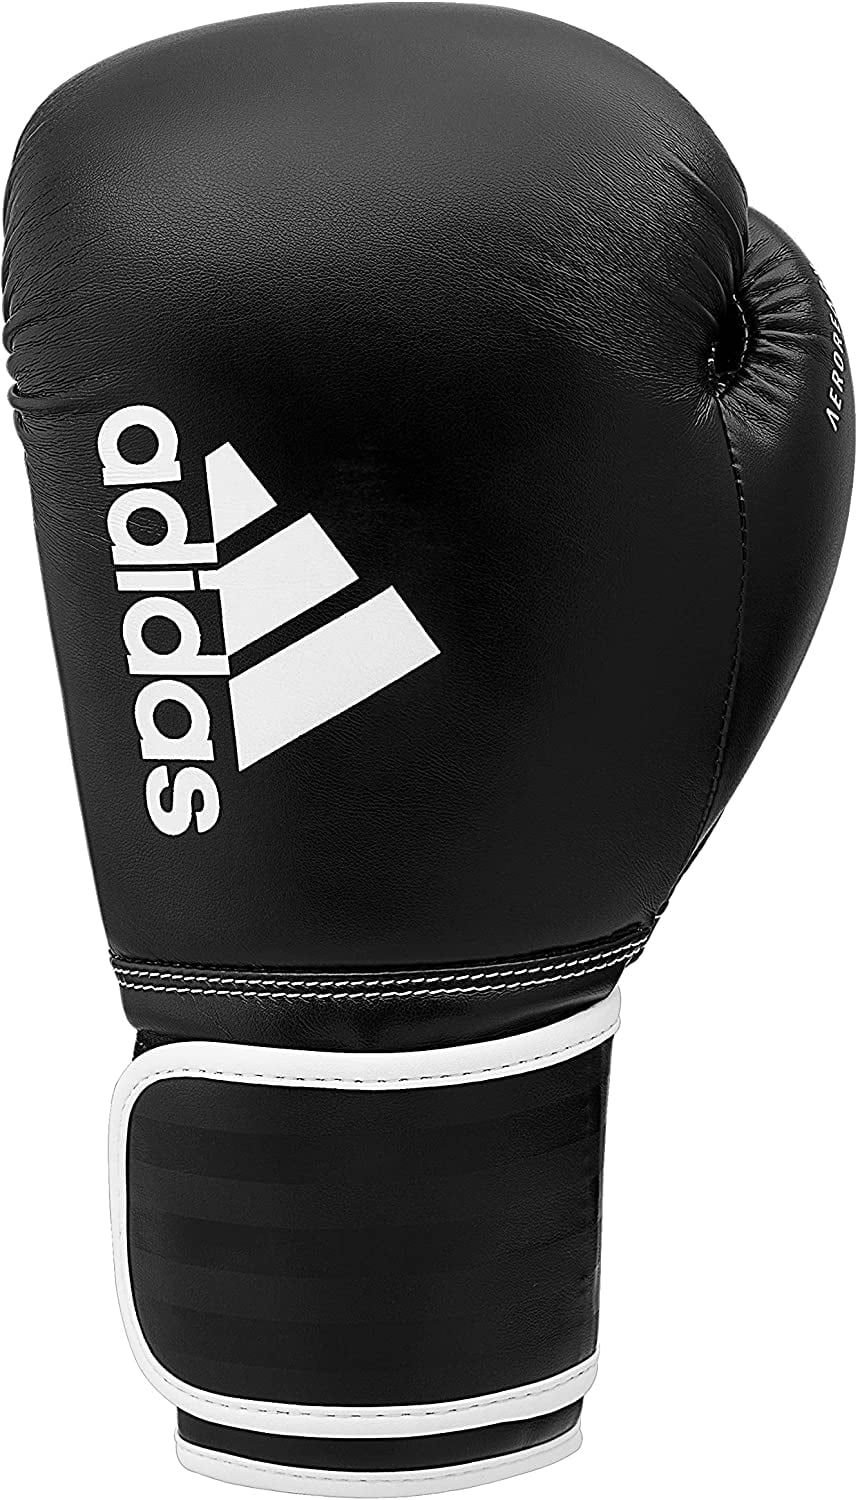 Adidas Hybrid 80 Boxing 6 and Black Men and Bag, Gloves, Training, Kickboxing, for Boxing, Oz., for Women